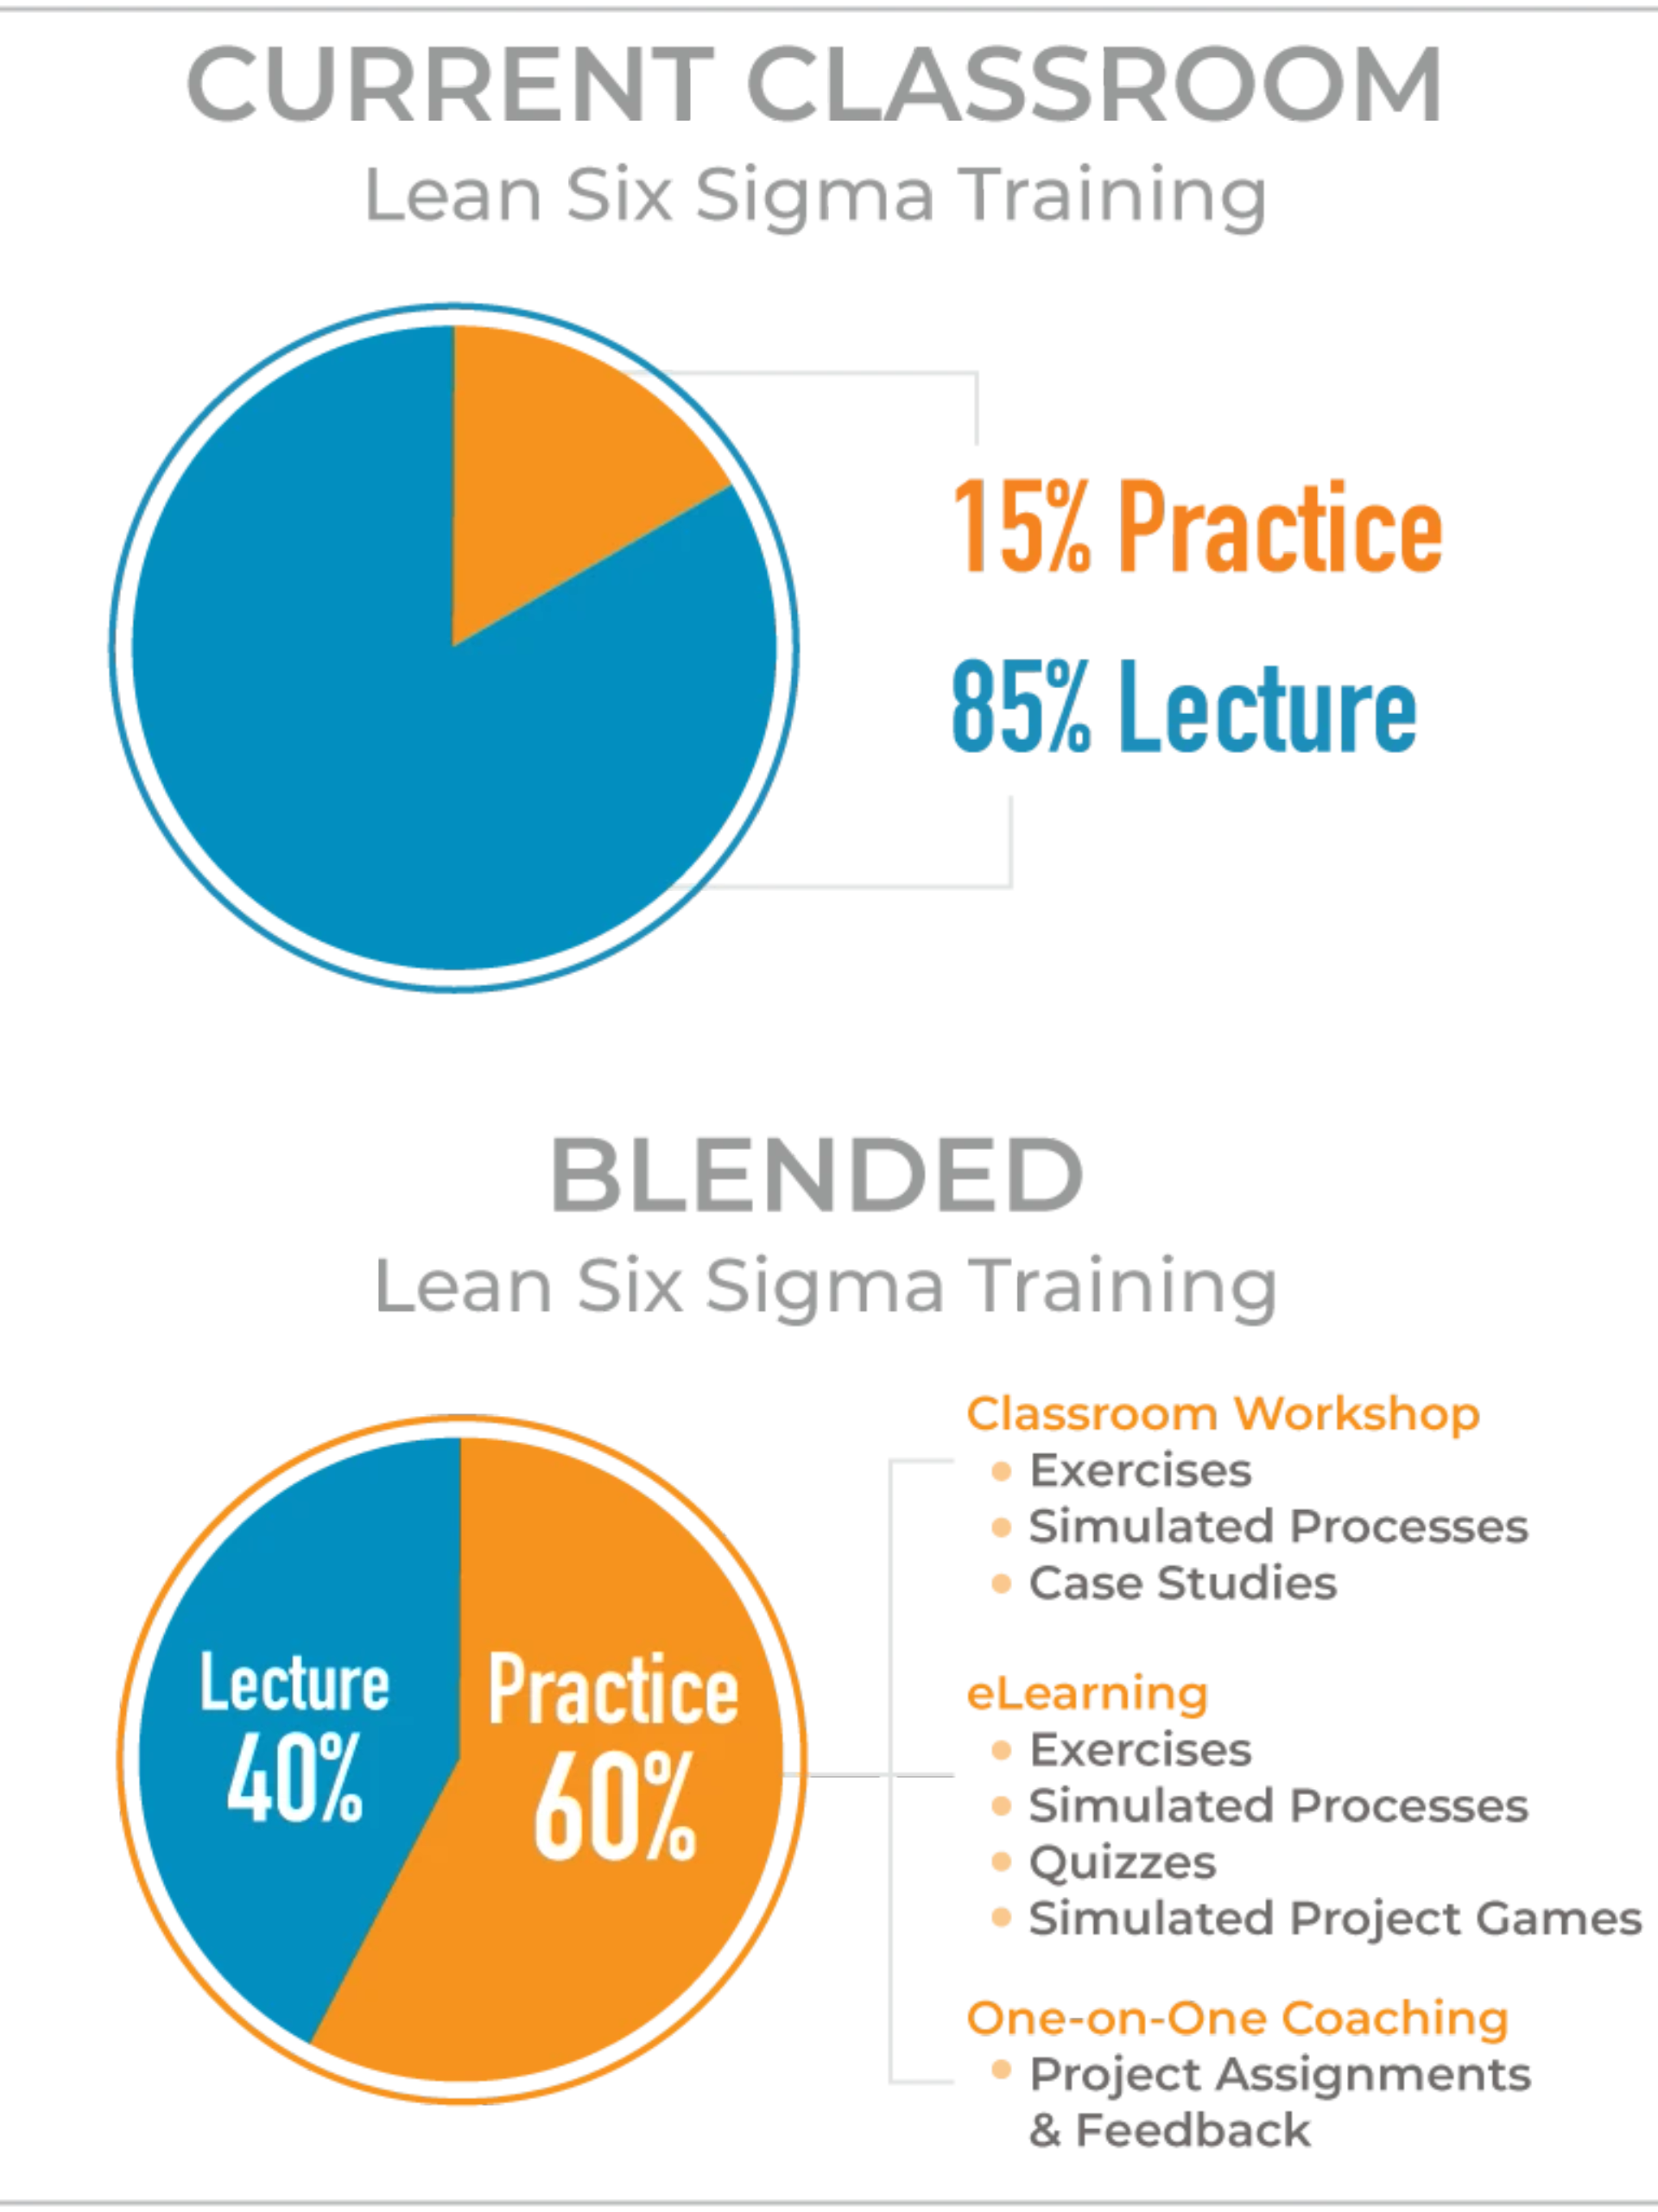 current classroom = 15% practice and 85% lecture. Blended training = 40% lecture and 60% practice